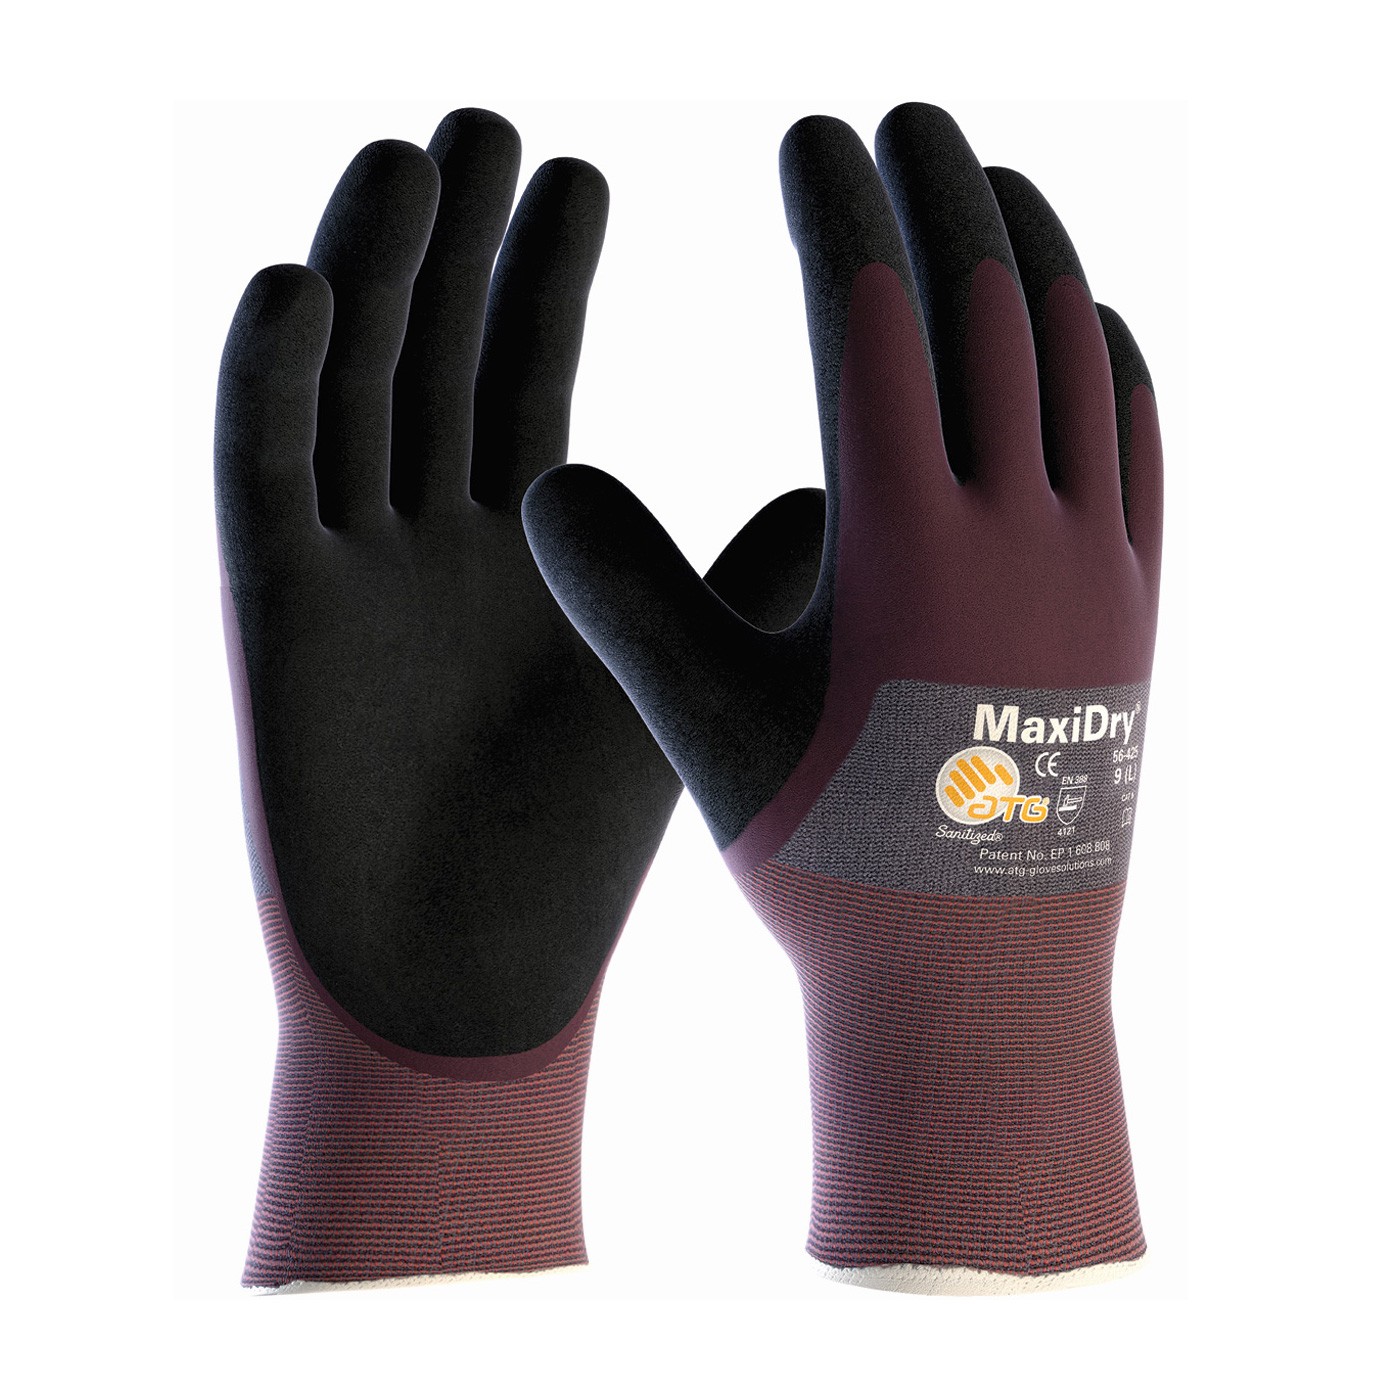 MaxiDry® Ultra Lightweight Nitrile Glove, 3/4 Dipped with Seamless Knit Nylon / Lycra Liner and Non-Slip Grip on Palm & Fingers (#56-425)